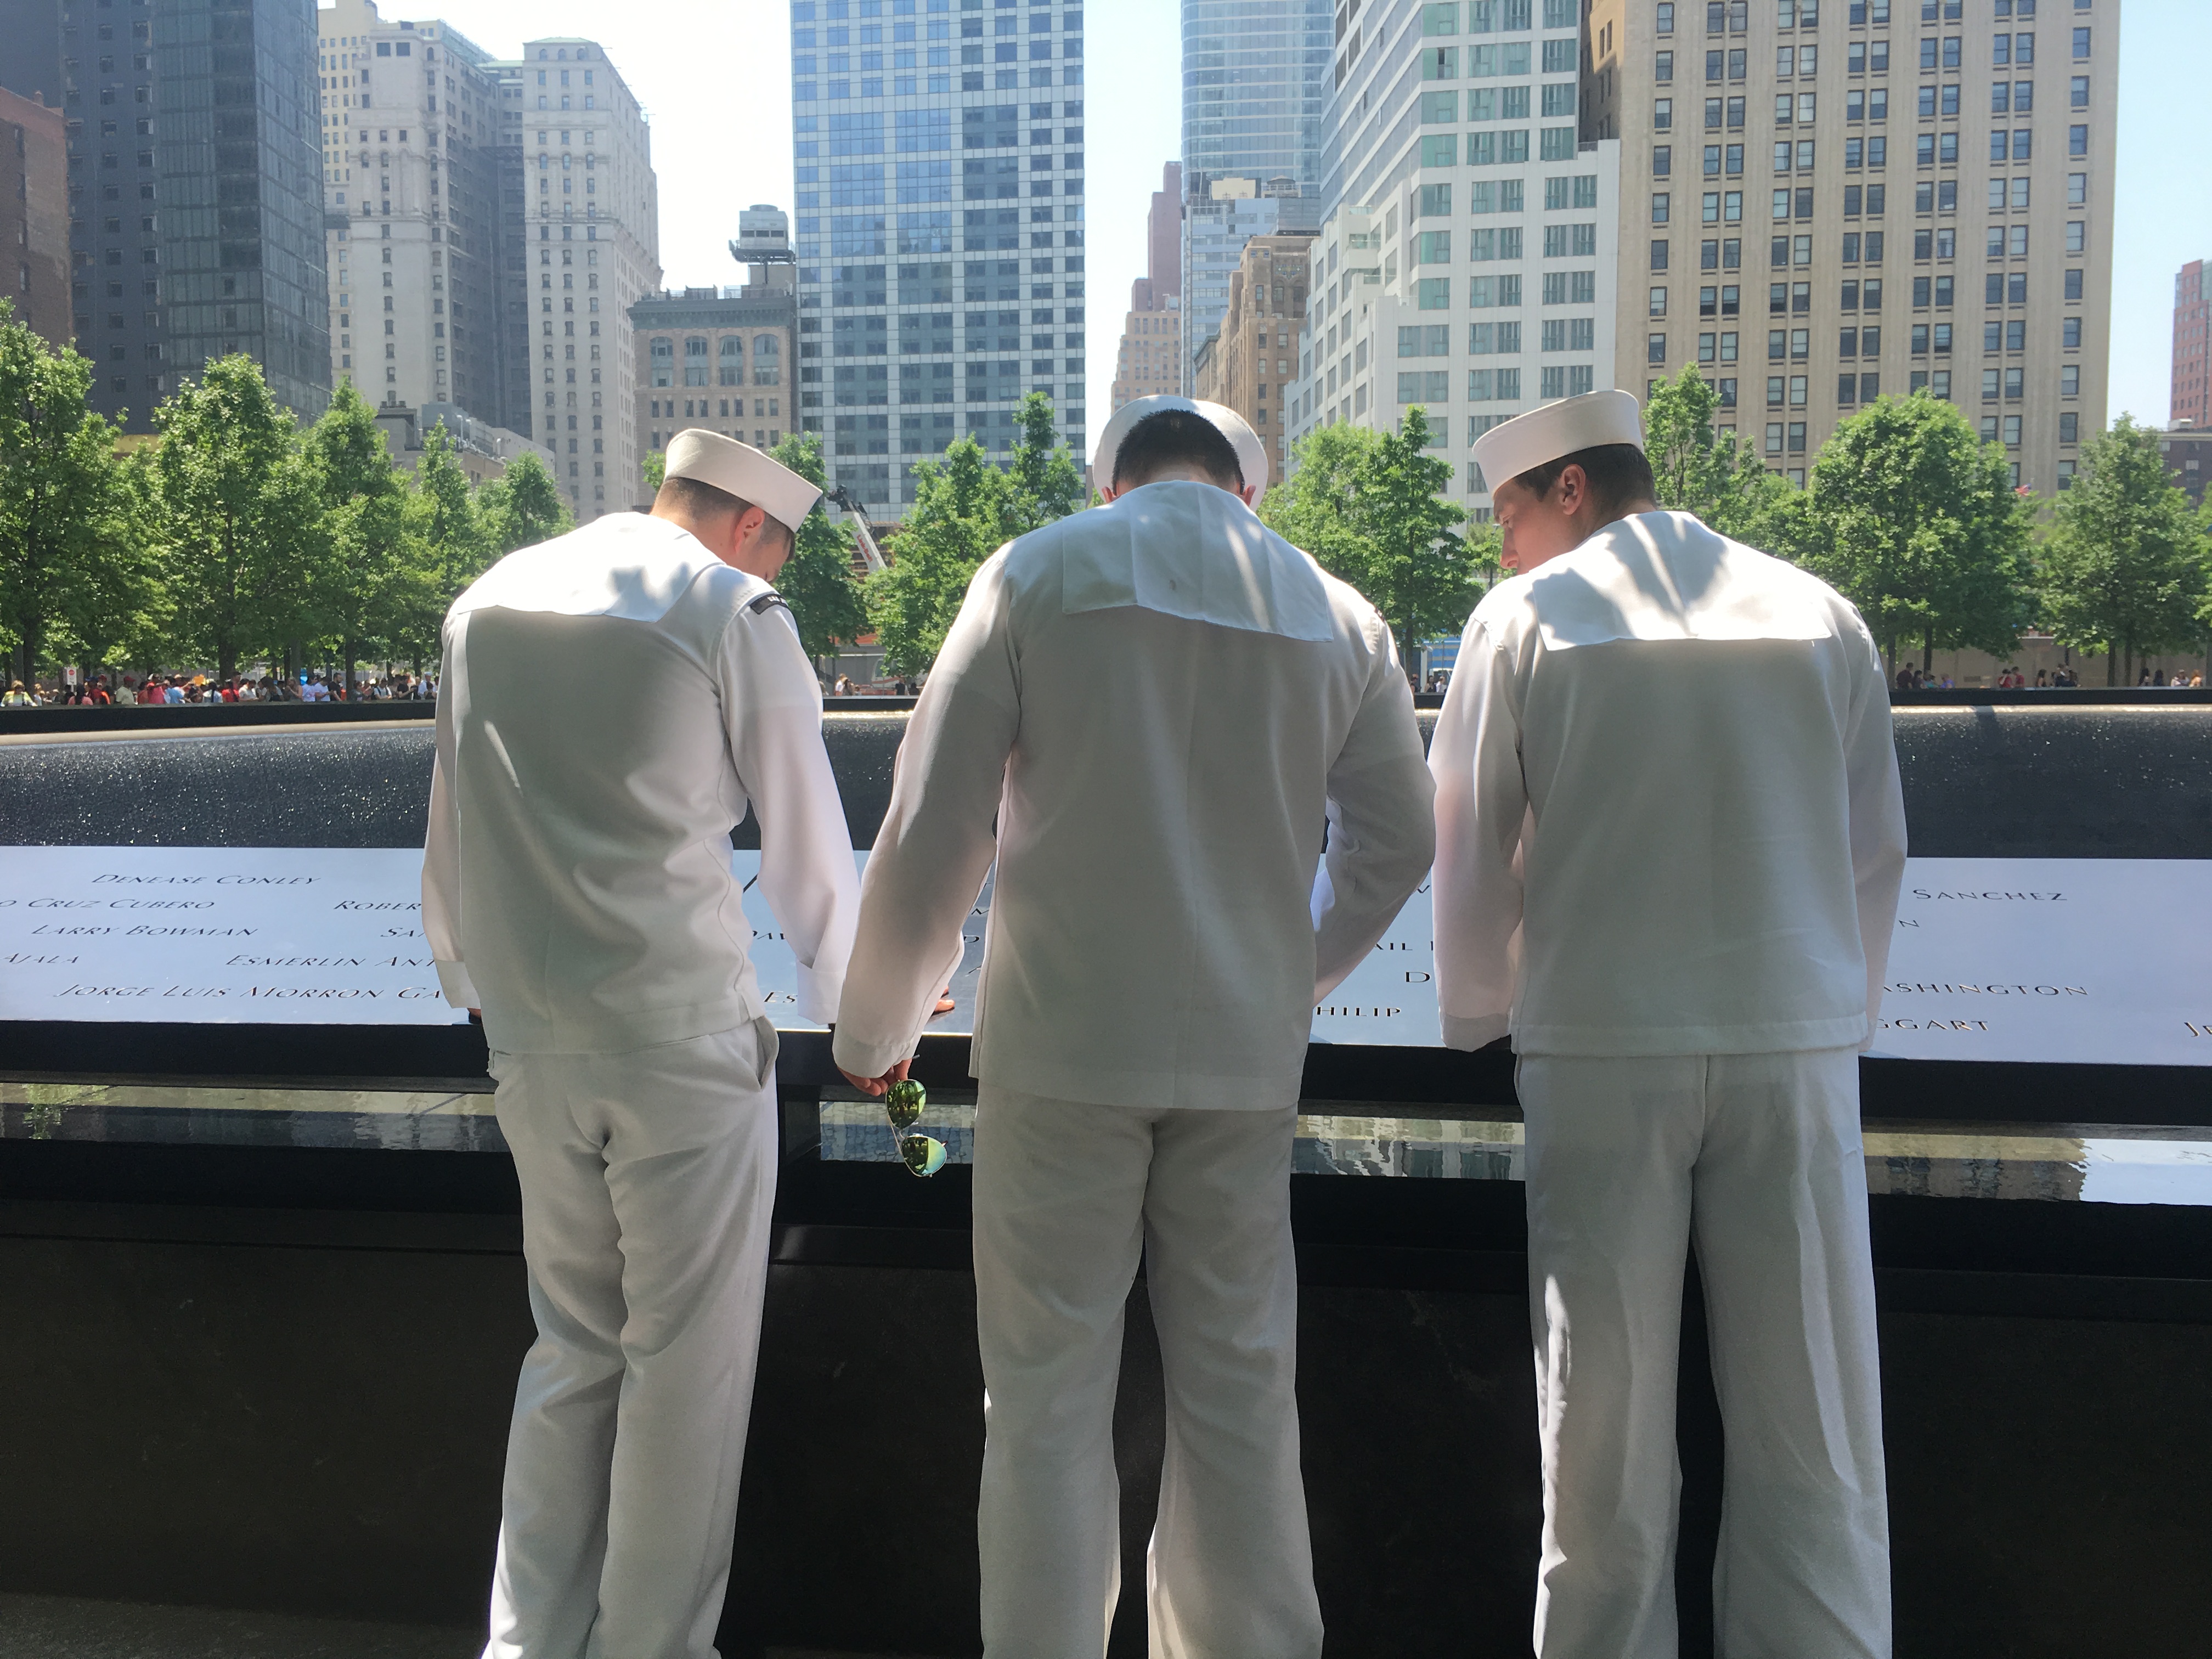 Three men in white U.S. Navy outfits look at a group of names on the 9/11 Memorial. They are turned away from the camera as they gather around the names on a bronze parapet.